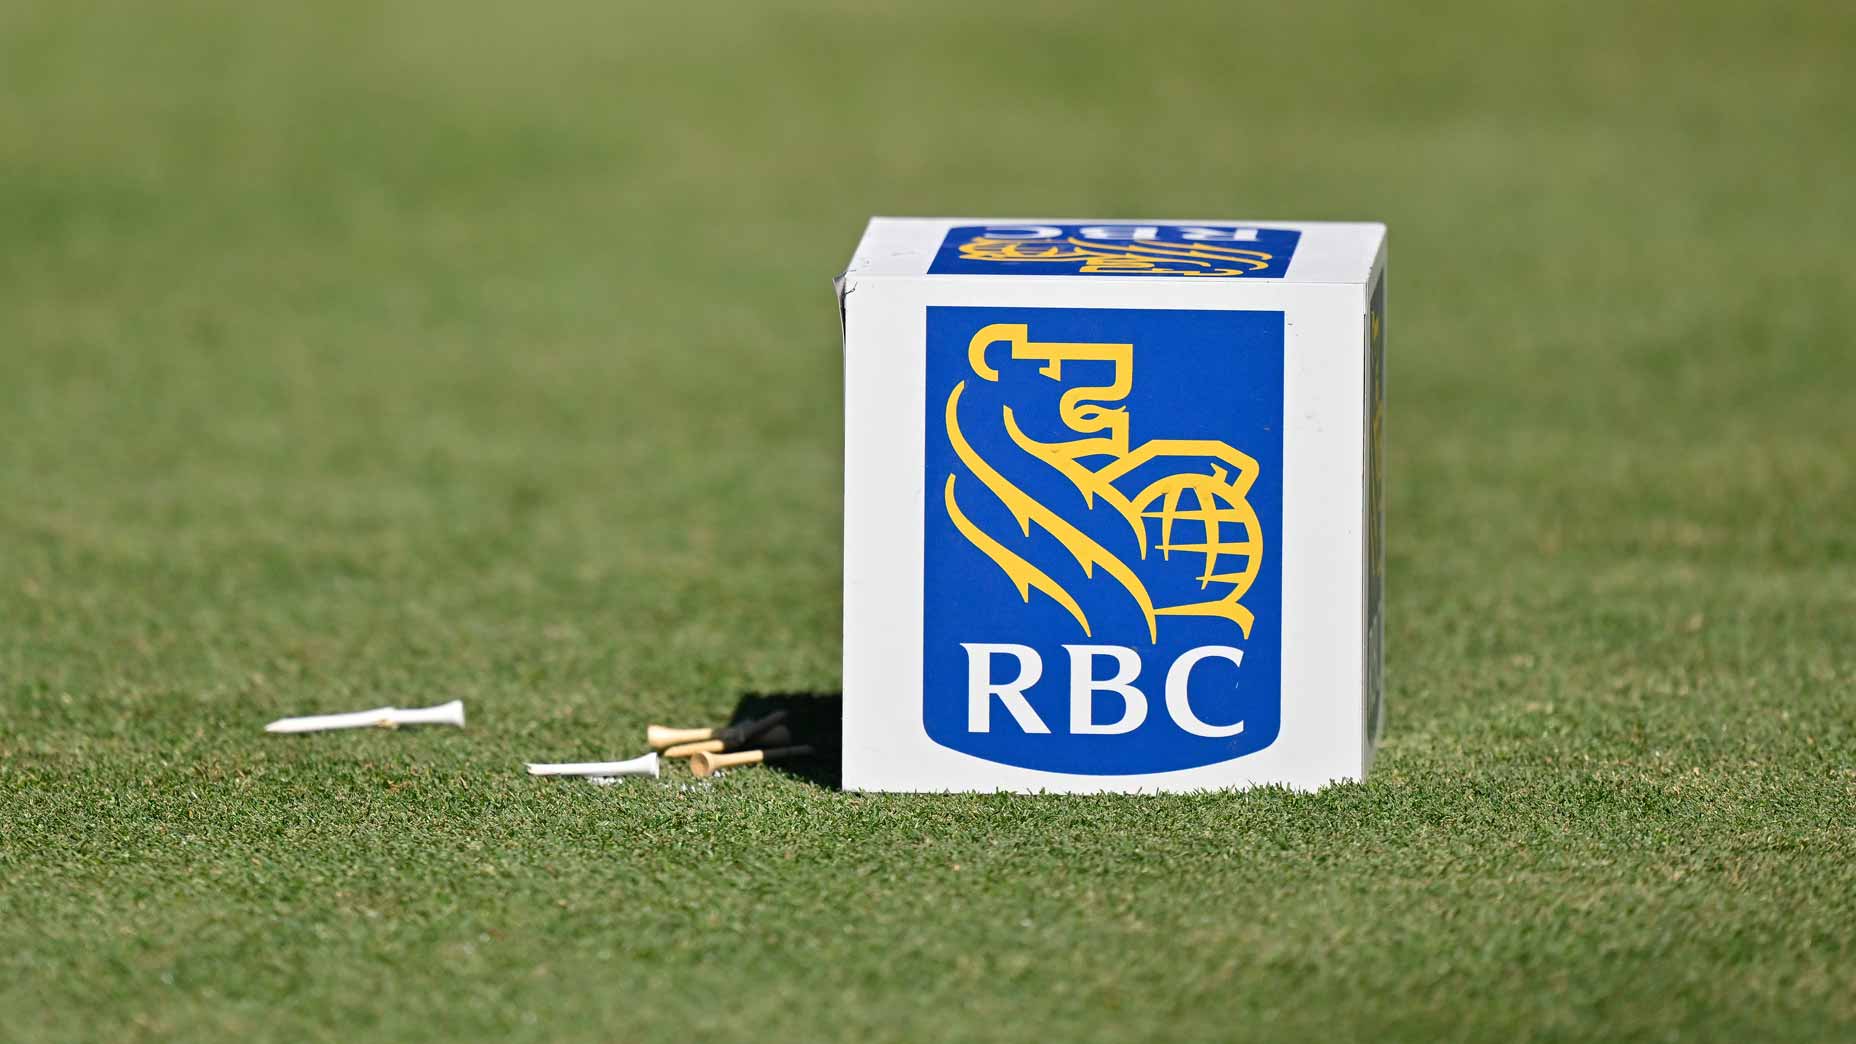 RBC Heritage tee marker pictured on tee at Harbour Town